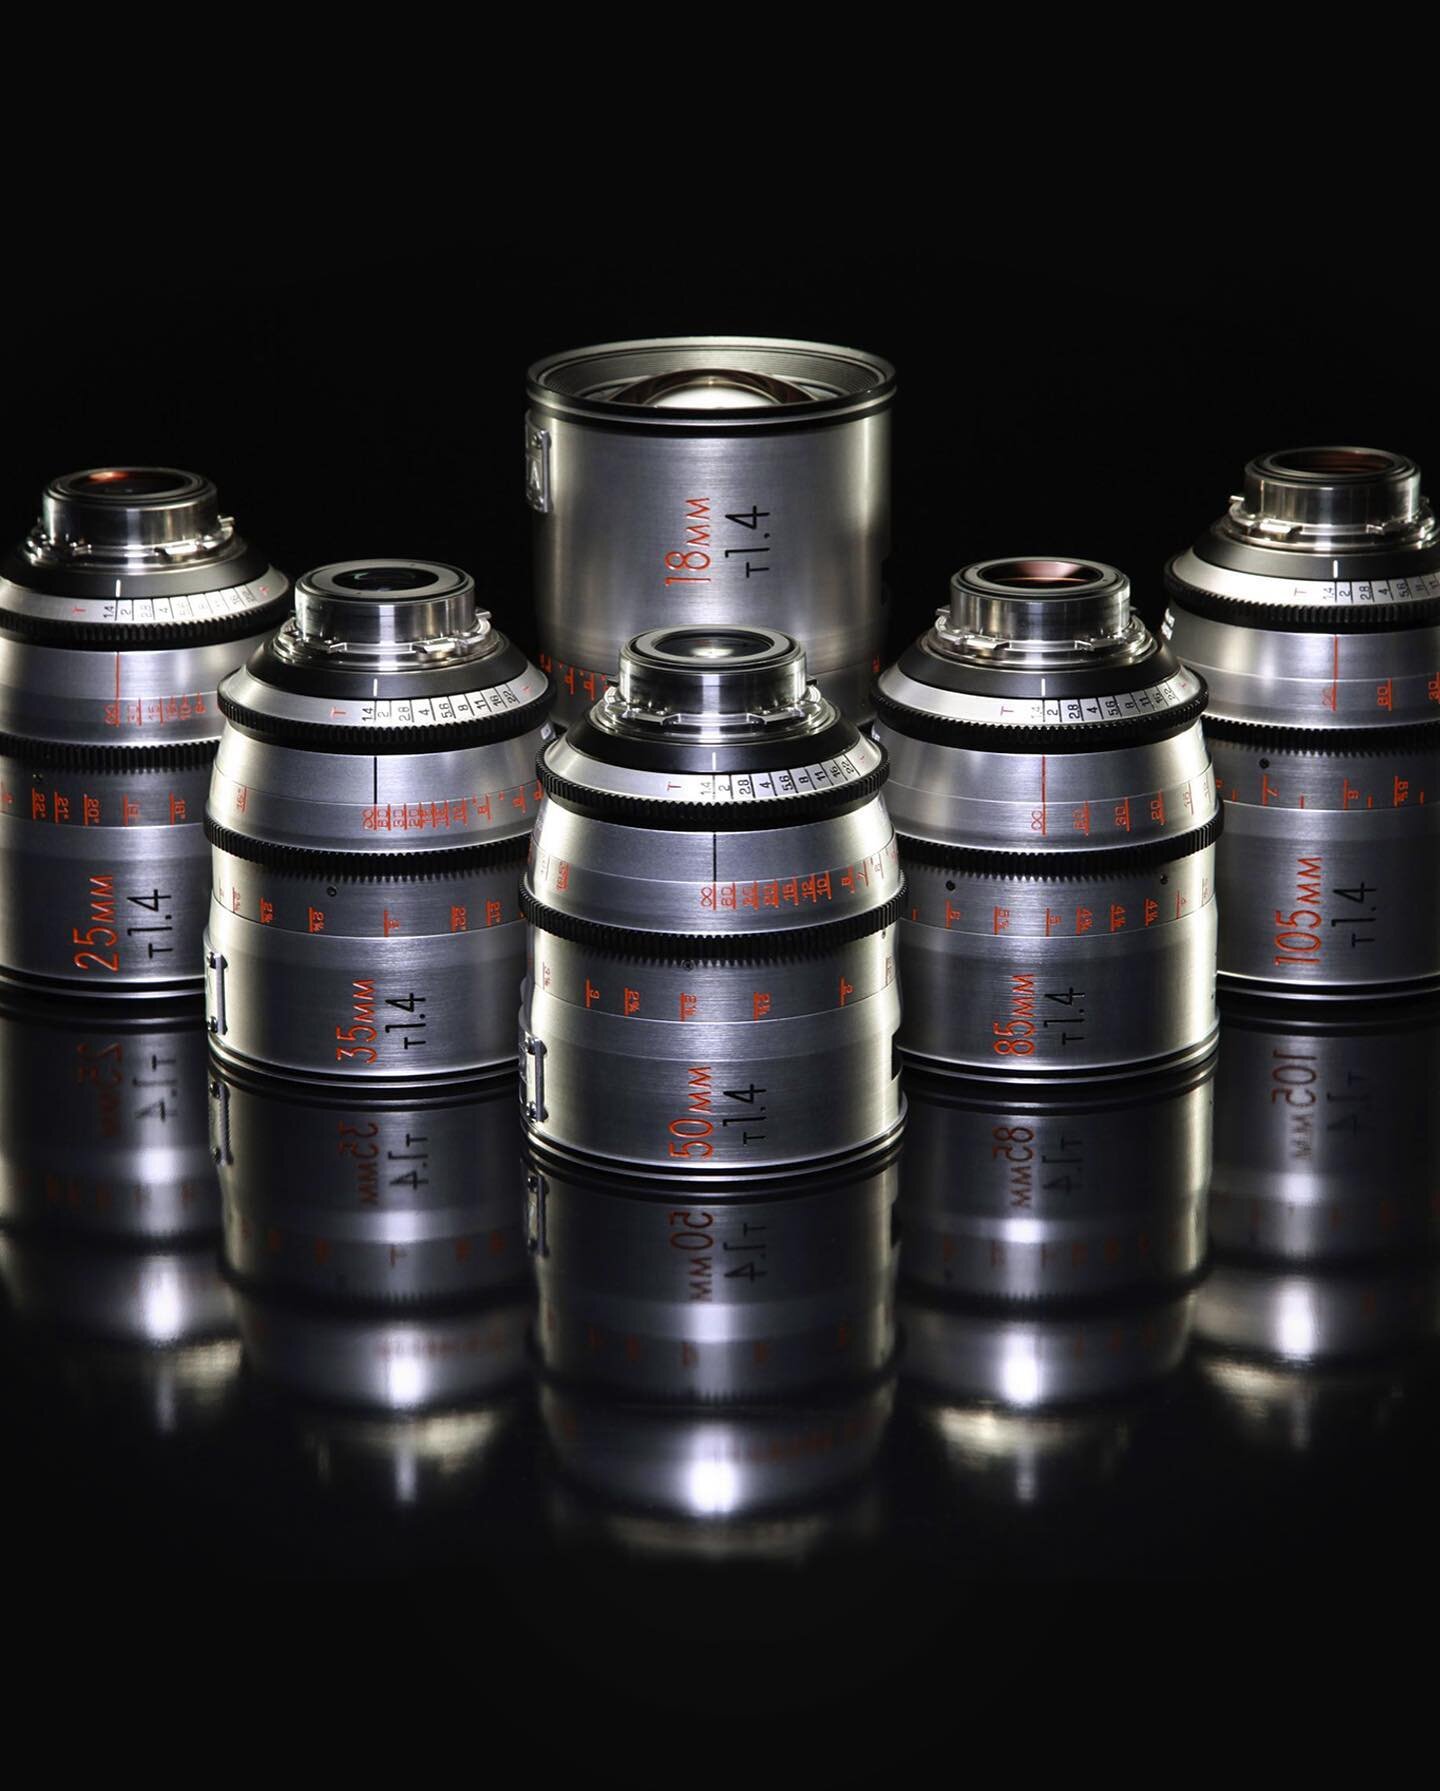 First @masterbuilt_lenses Classics in Brooklyn! 🔬🎆

Most recently featured on Umbrella Academy Season III, the Masterbuilt Classics are a new revelation in Full Frame / Vista Vision cinematography. The Classic series lenses excel with a smooth focu